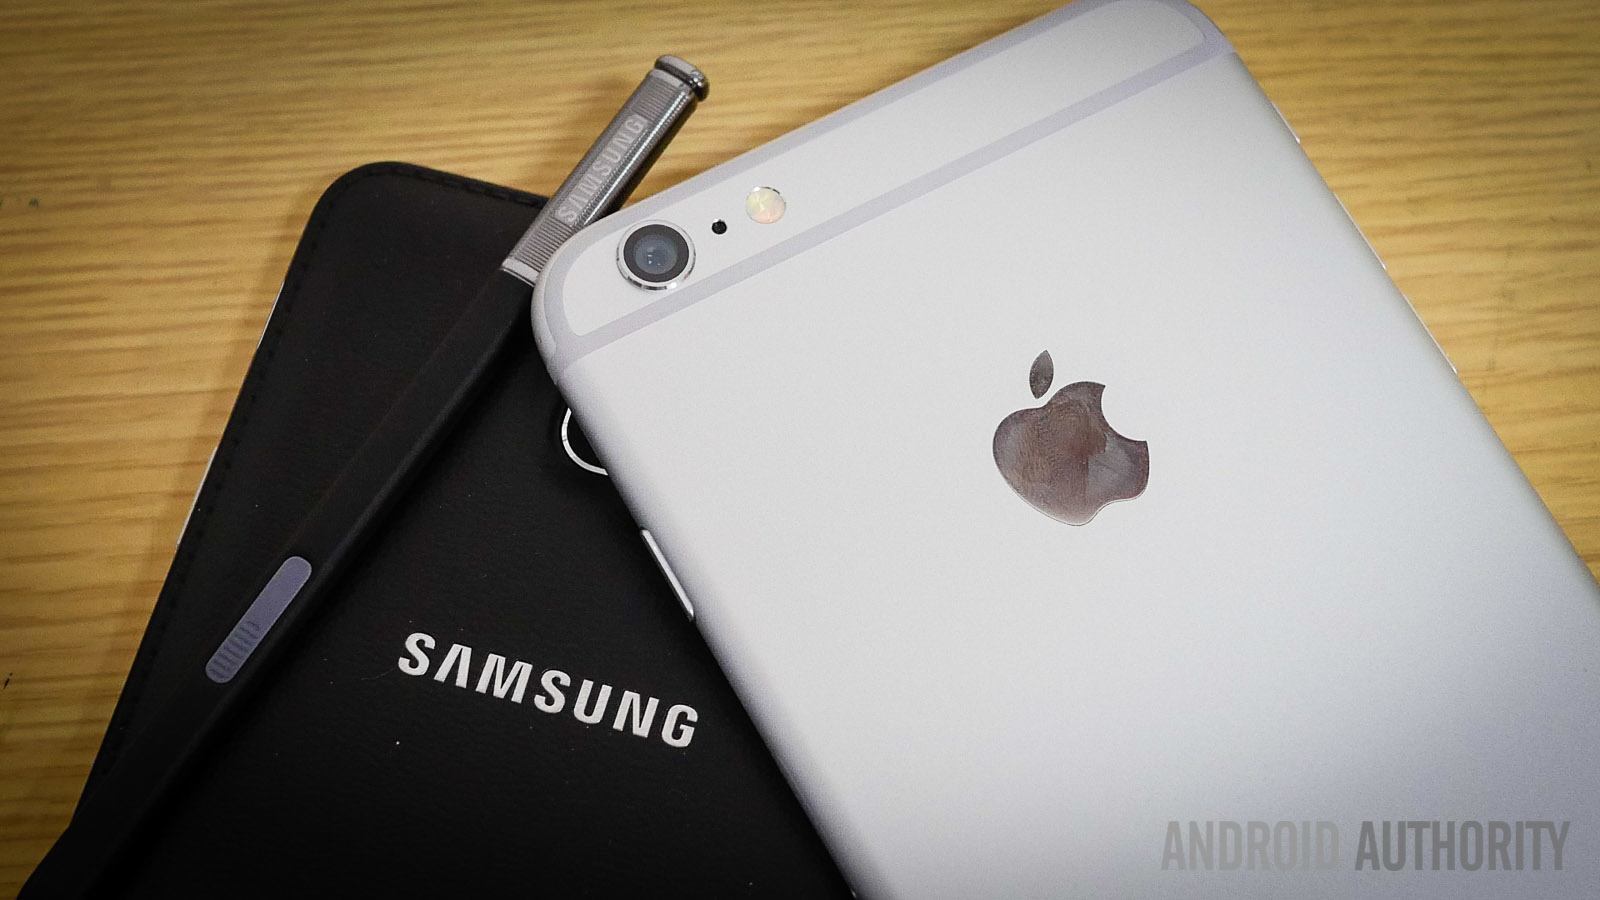 iphone 6 plus vs samsung galaxy note 3 quick look aa (3 of 20)